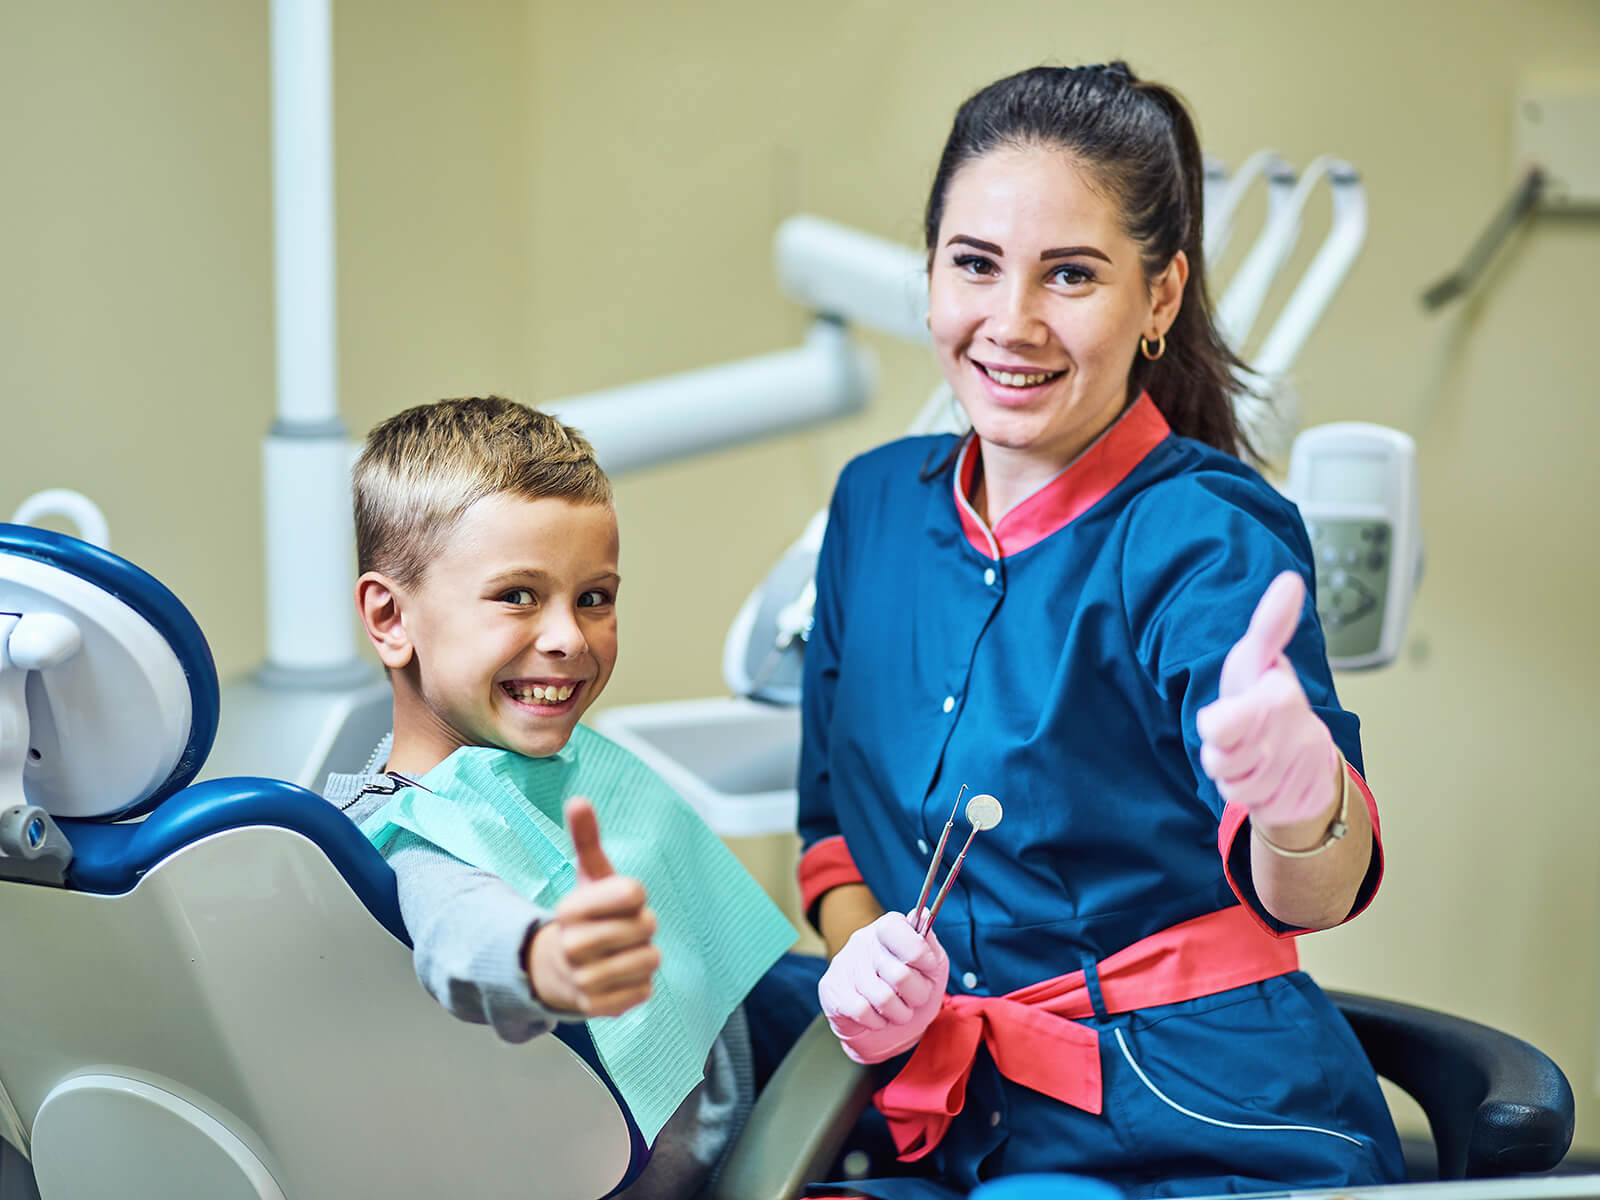 Tips For Choosing The Right Pediatric Dentist For Your Child